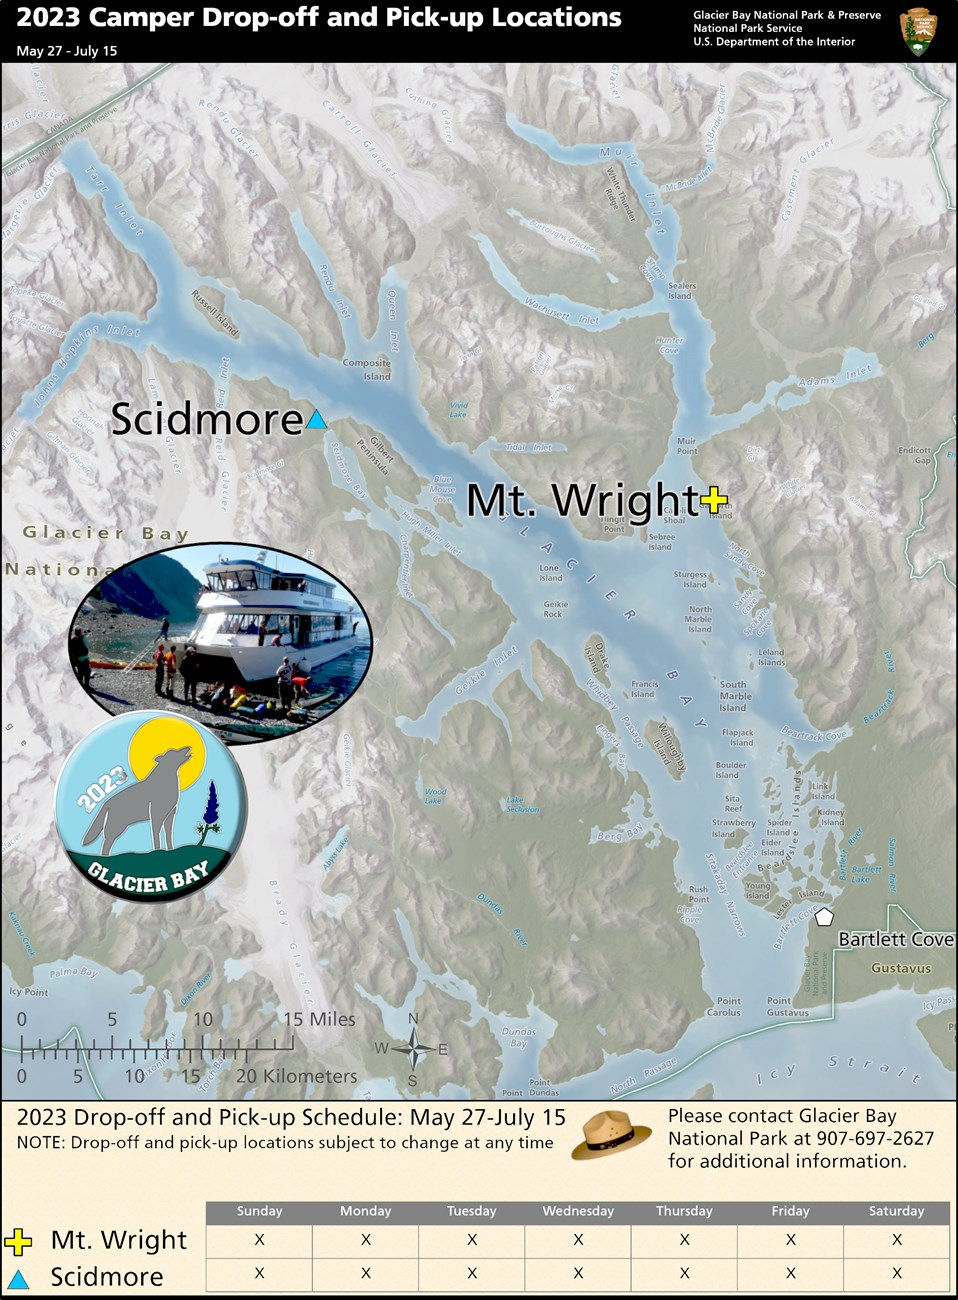 Glacier Bay May 2023 Camper Drop Off locations. Contact the Visitor Information Station for precise details of this map 907-697-2627